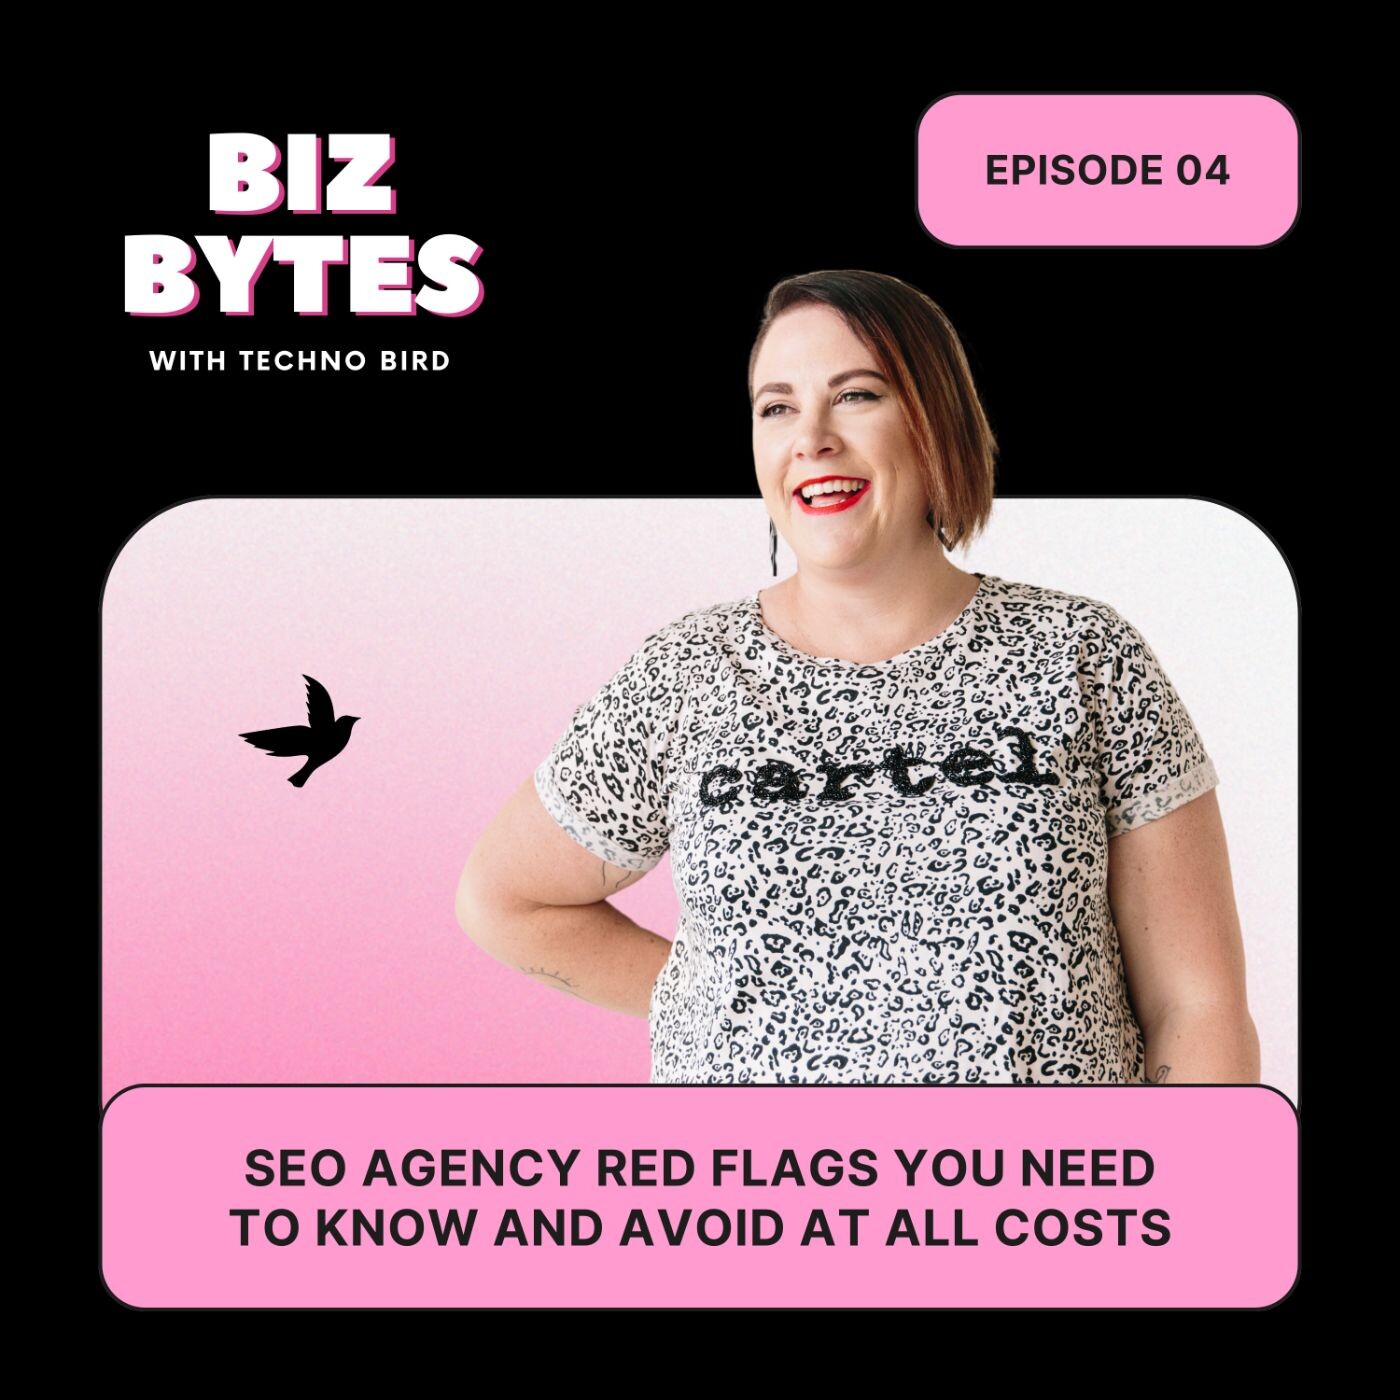 Episode 4 - SEO agency red flags you need to know and avoid at all costs